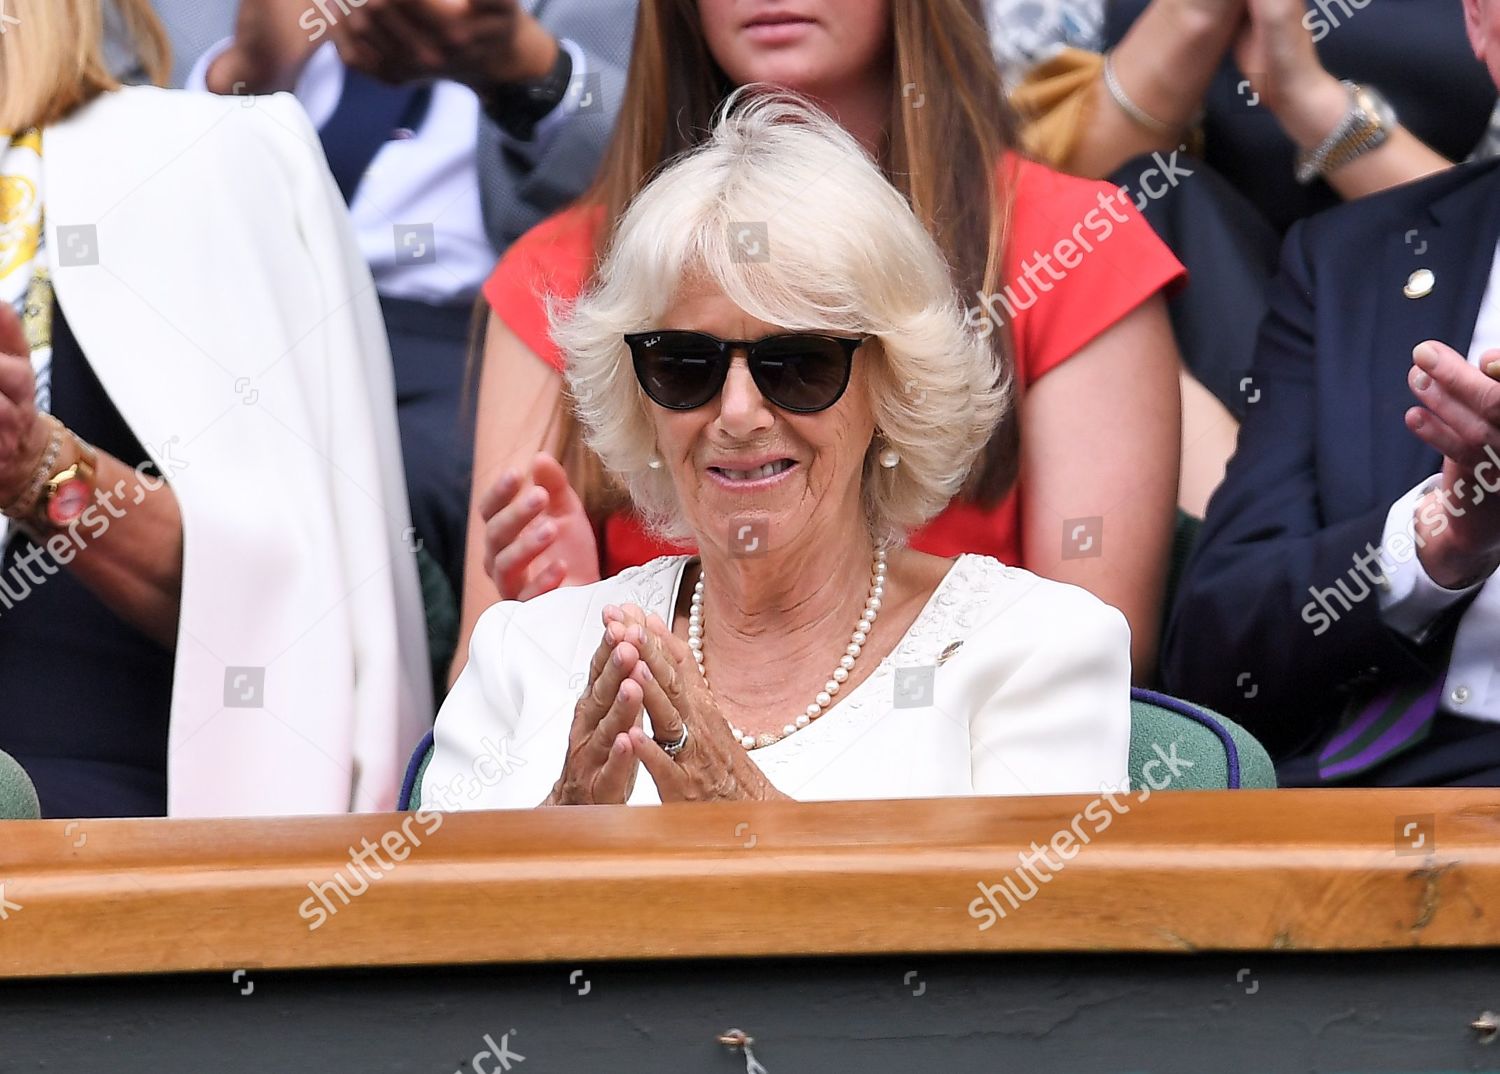 wimbledon-tennis-championships-day-9-the-all-england-lawn-tennis-and-croquet-club-london-uk-shutterstock-editorial-10331427ay.jpg